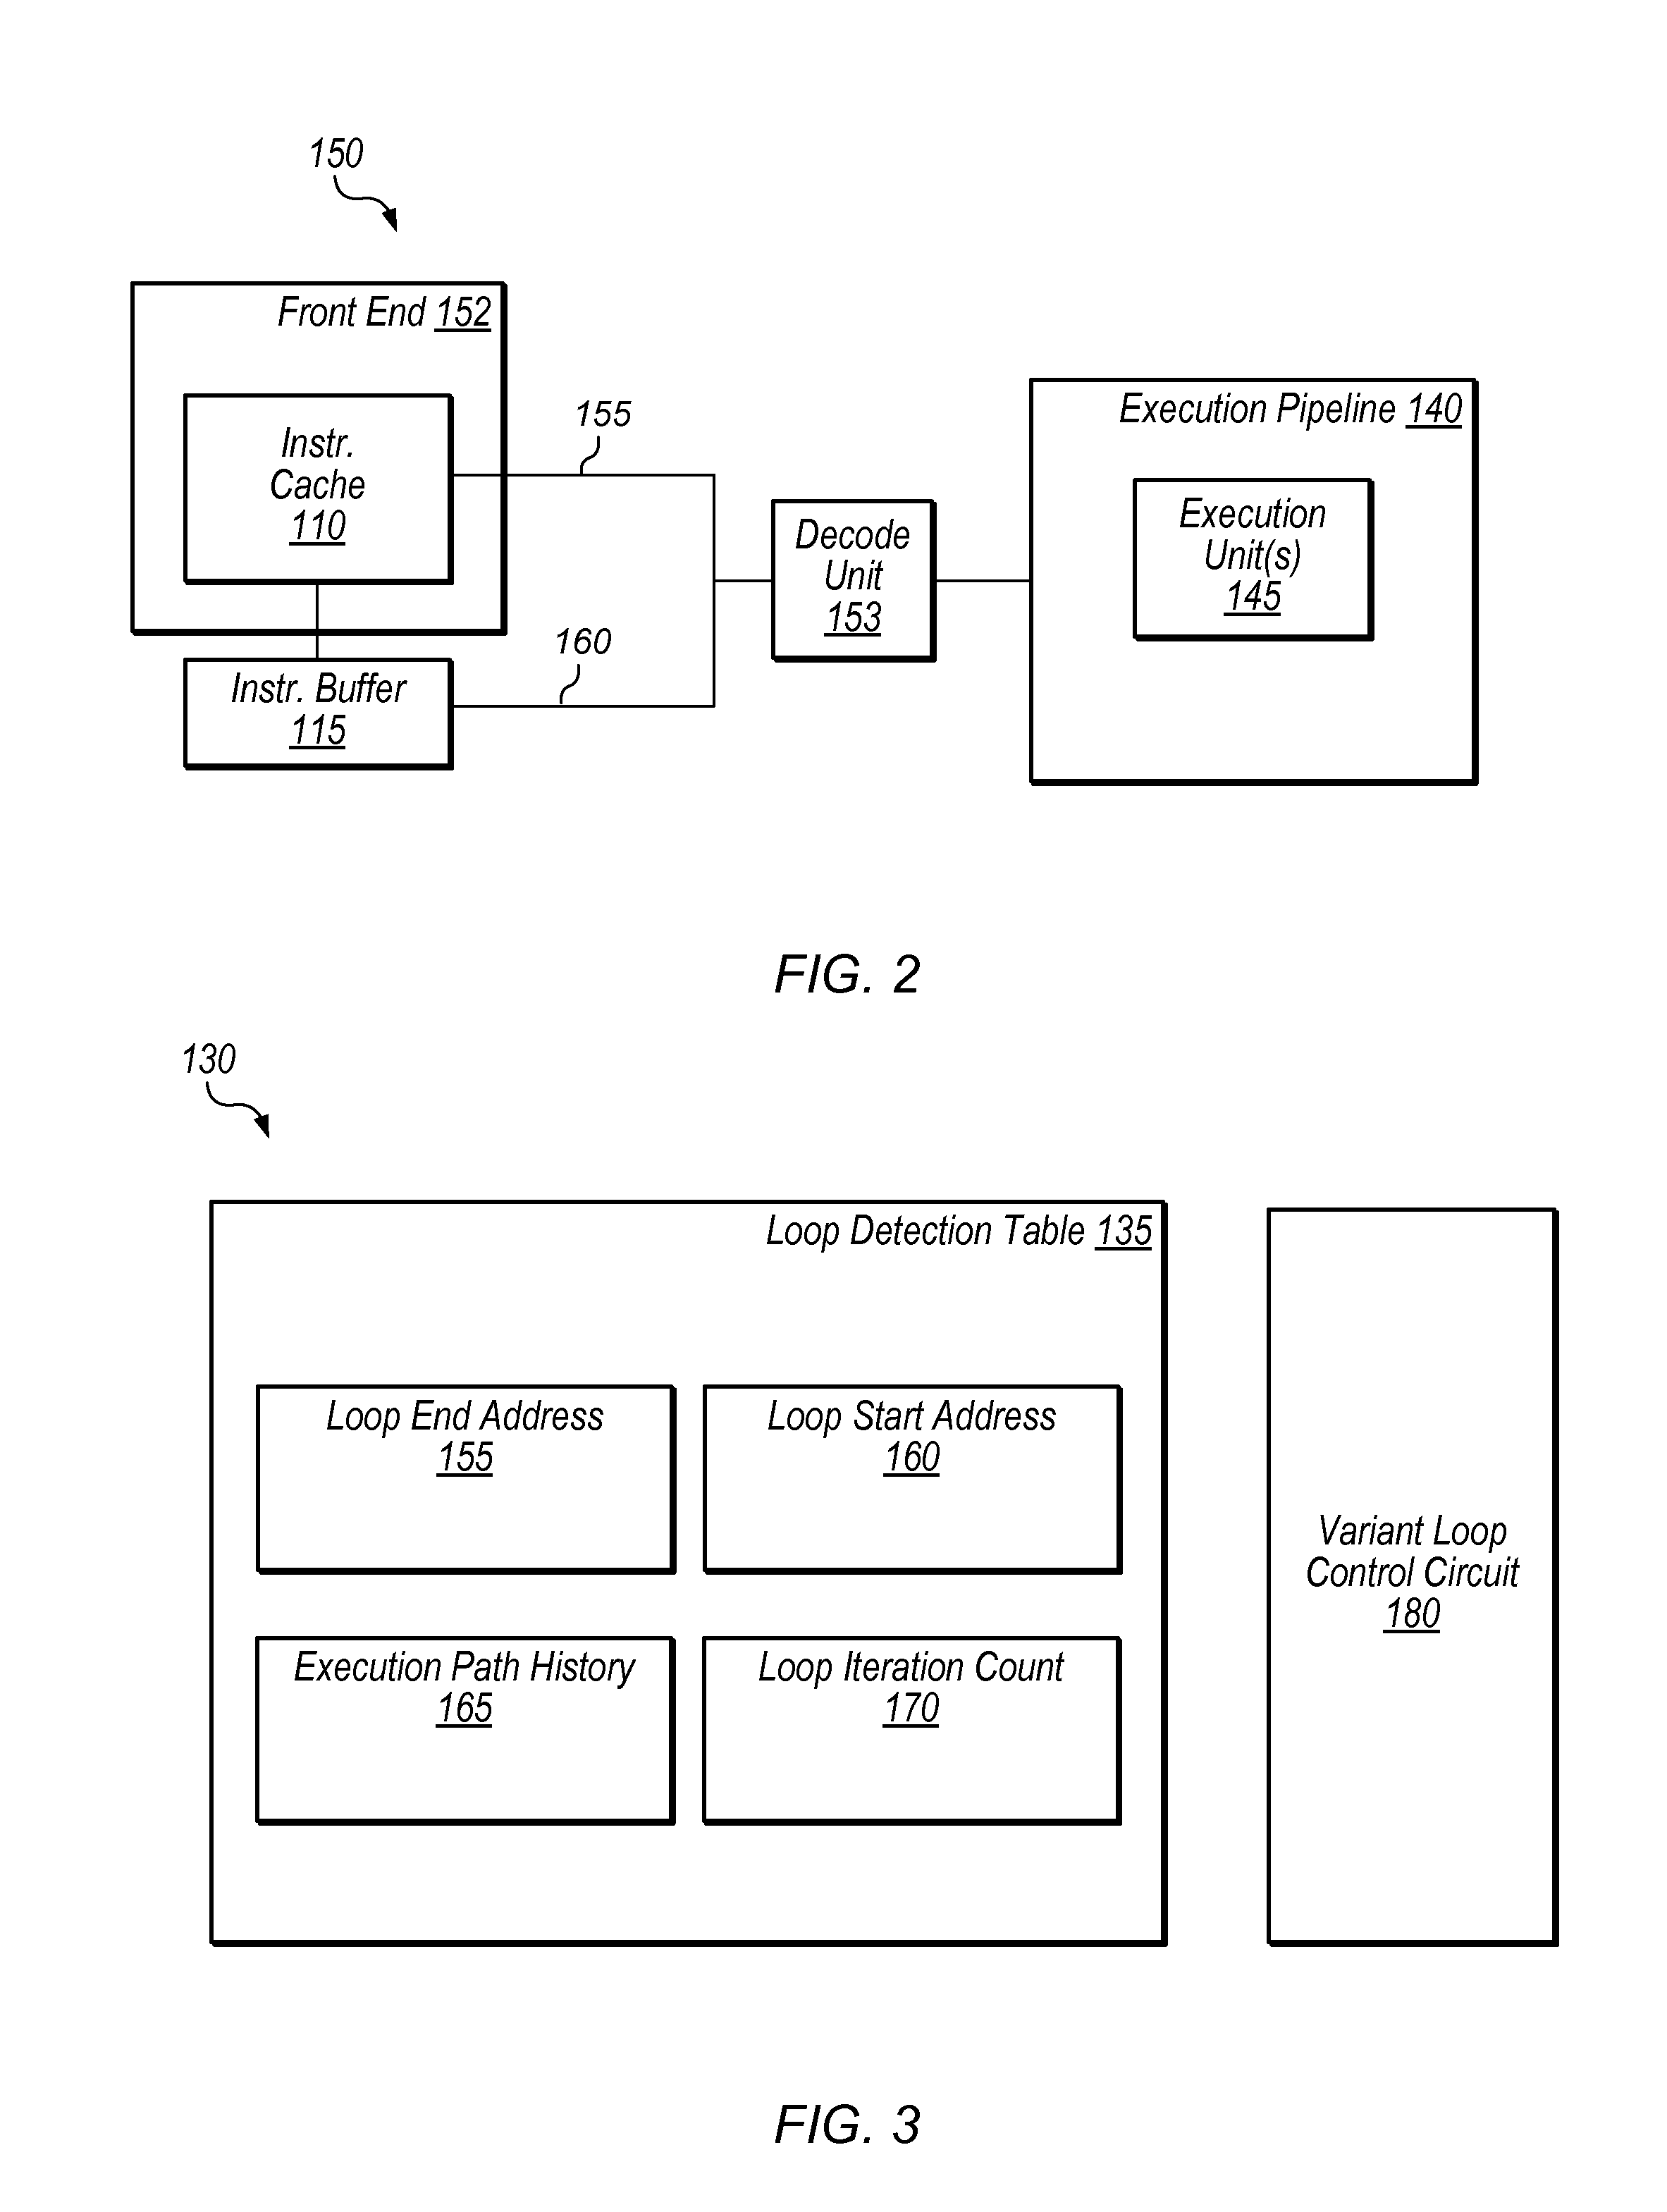 Instruction loop buffer with tiered power savings